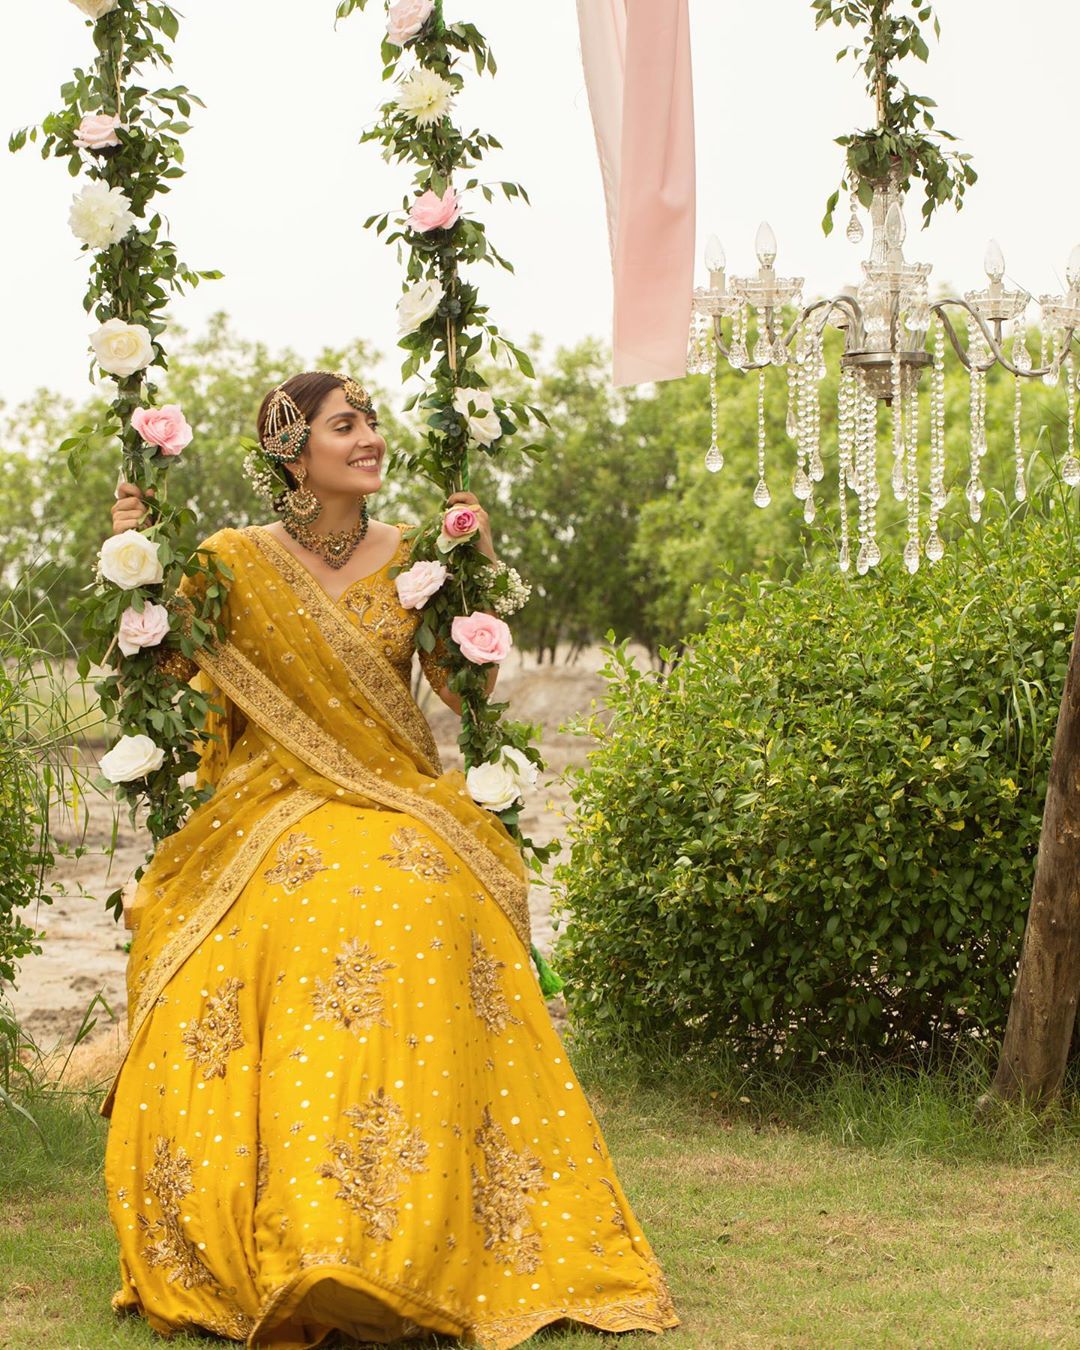 Ayeza Khan is Looking Gorgeous in Yellow Dress in Her Shoot